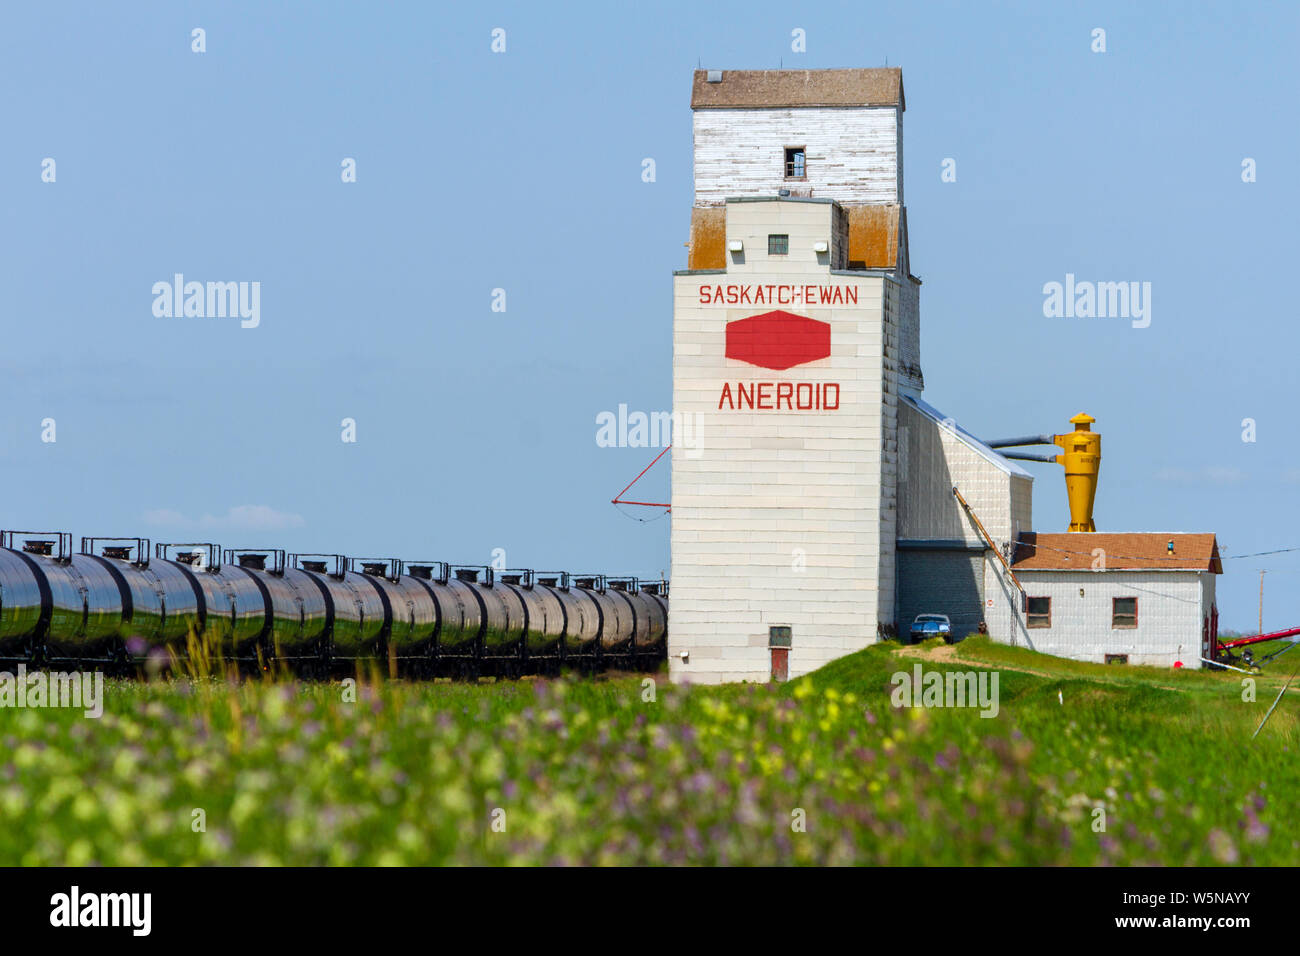 Aneroid, Saskatchewan, Canada - July 8, 2019: Landscape scenic view of old wooden grain elevator in the Canadian prairie town of Aneroid, Saskatchewan Stock Photo